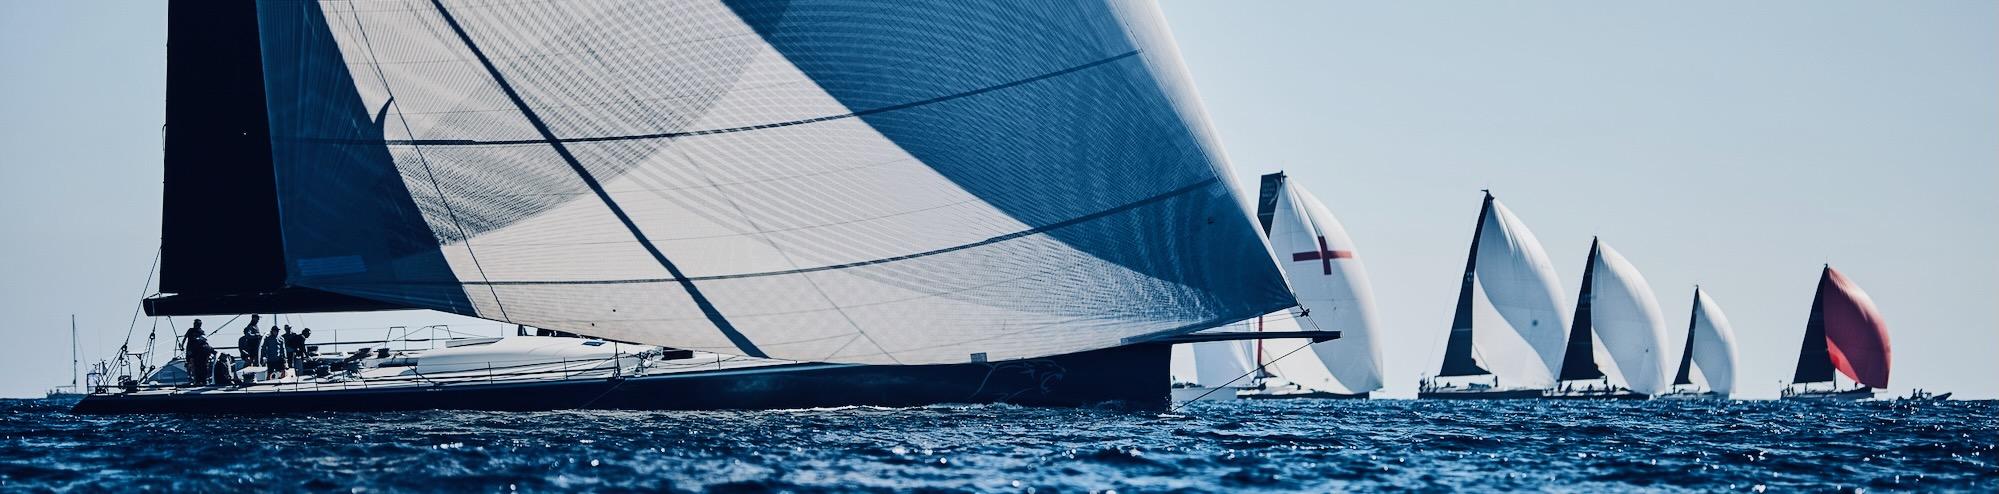 The second edition of the RORC Nelson’s Cup Series kicks off with racing from Tuesday 13th February. An international fleet of boats from 13 countries will be racing: Antigua; Australia; Canada; Cayman Islands; France; Germany; Great Britain; Monaco; Netherlands; South Africa; Sweden; Switzerland and the United States of America.